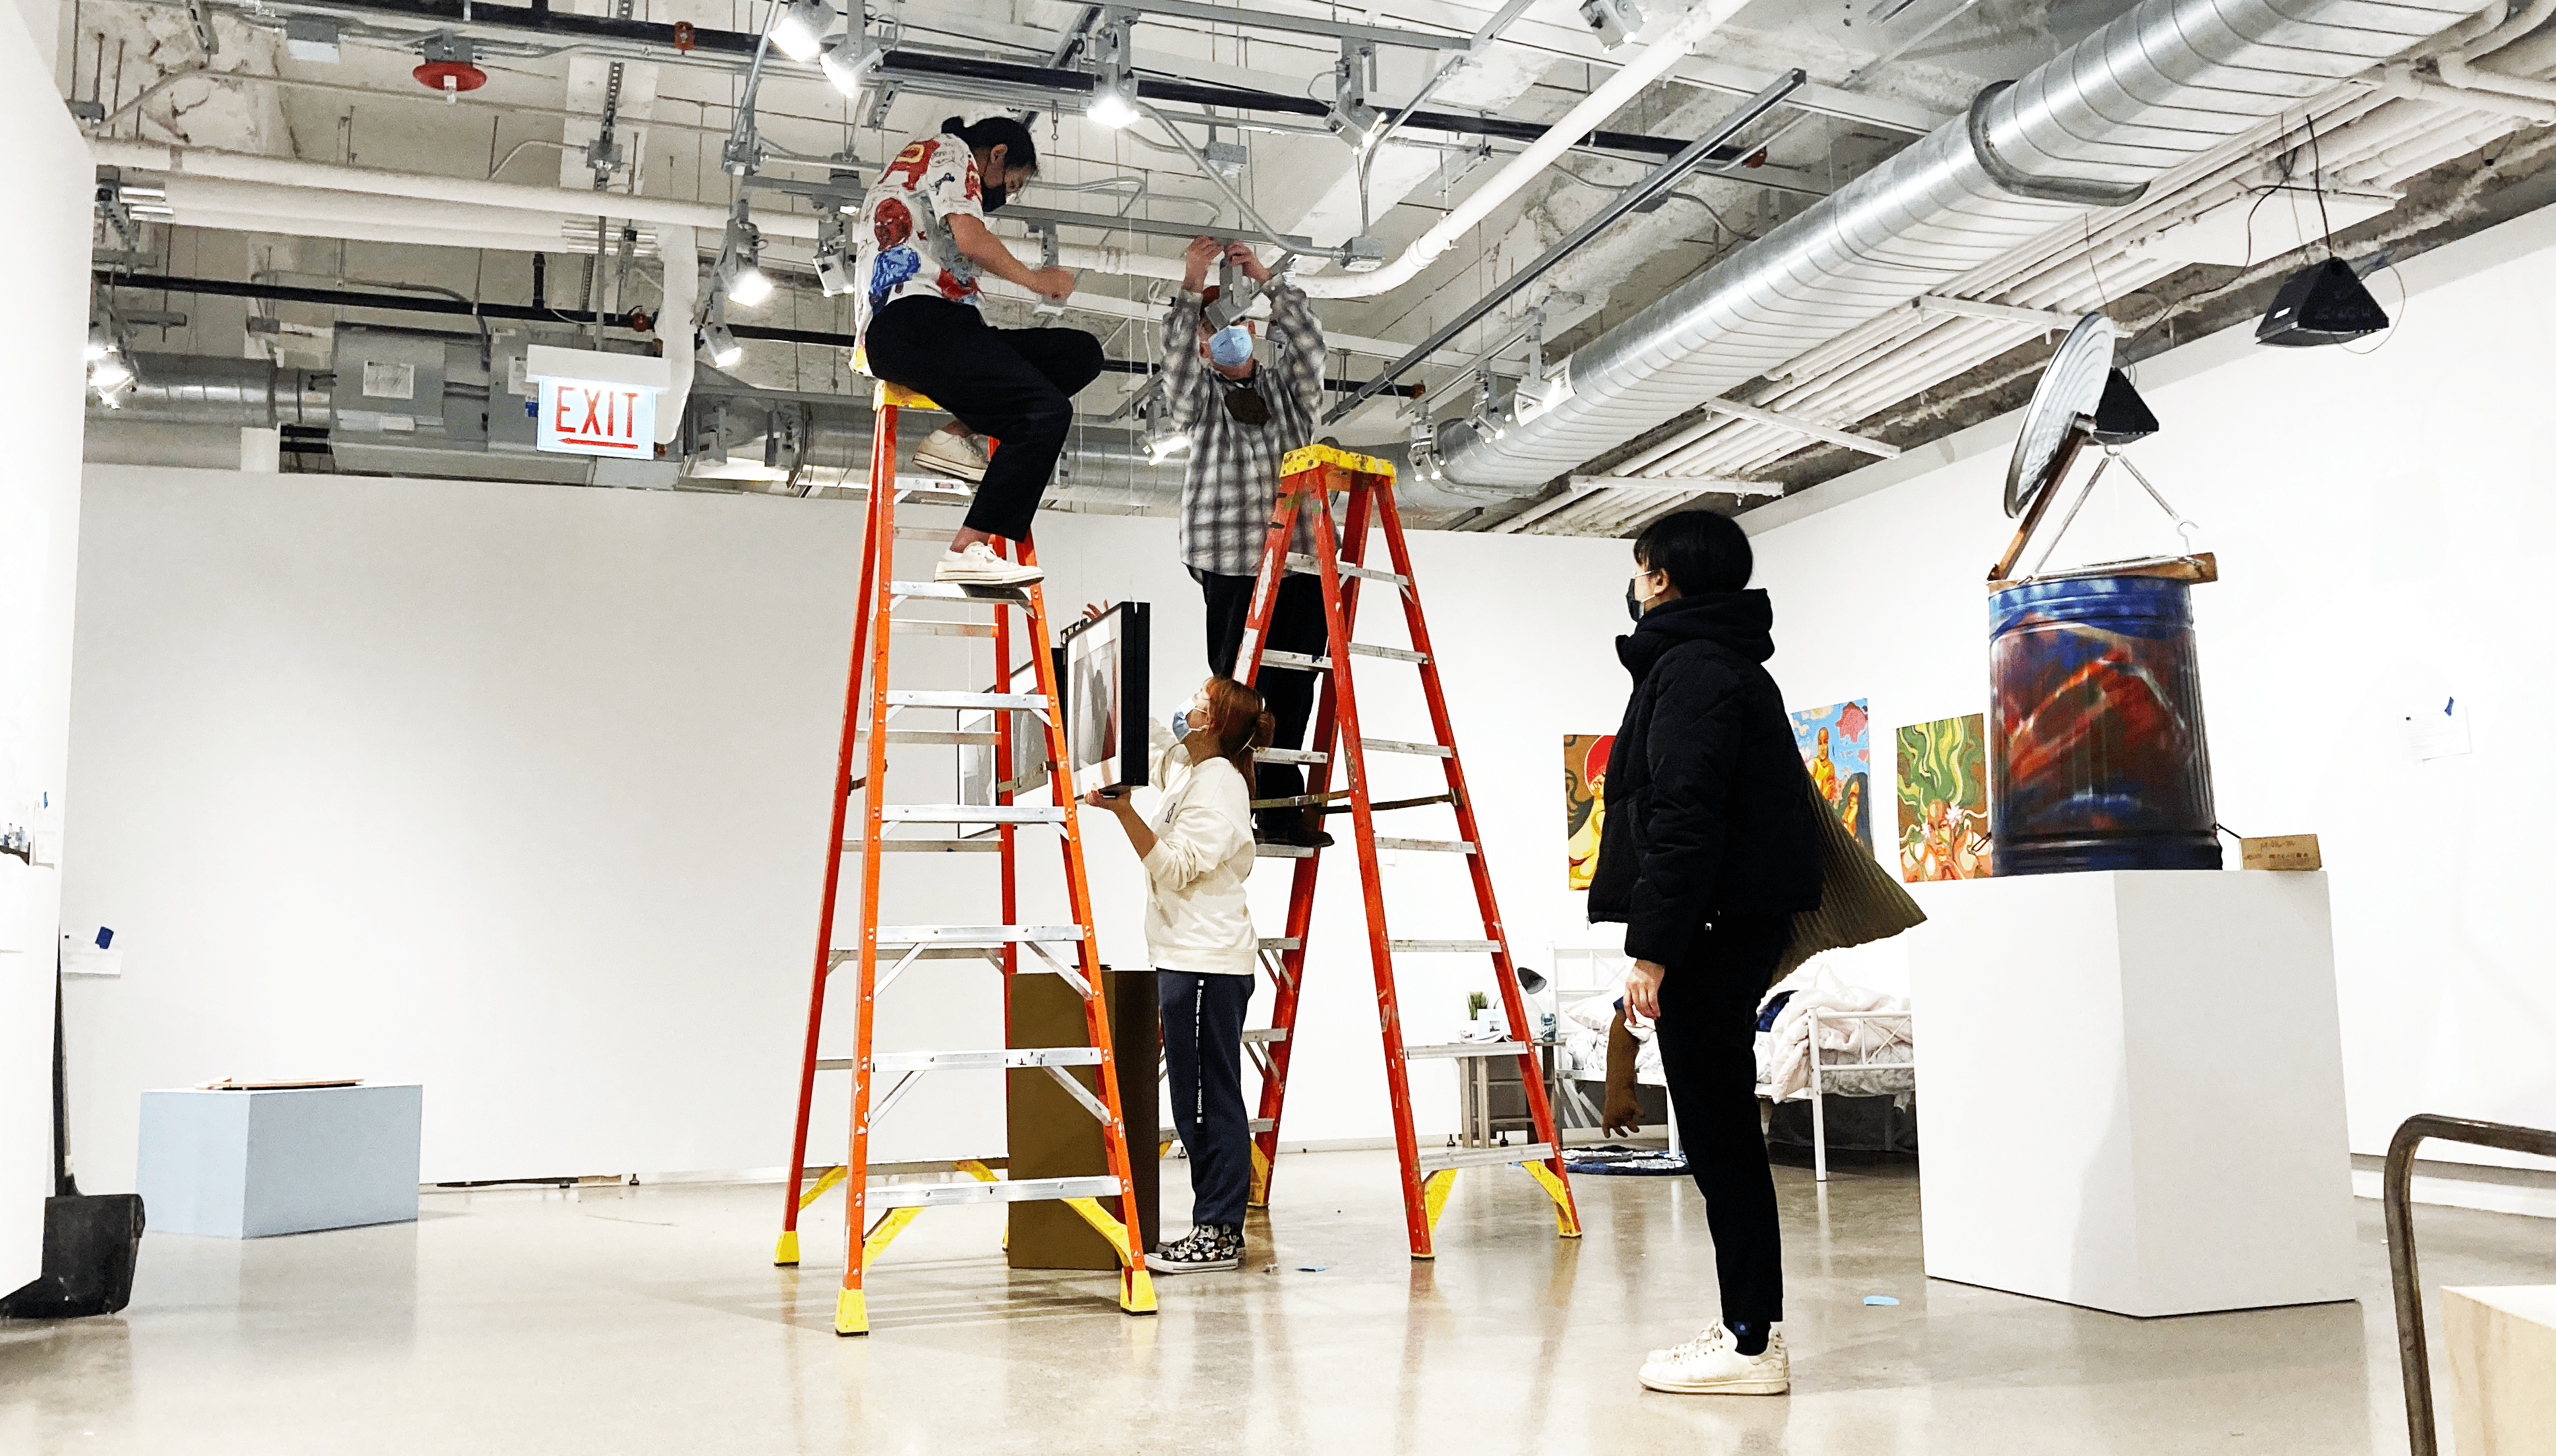 Students and faculty climb ladders to hang things from the ceiling.